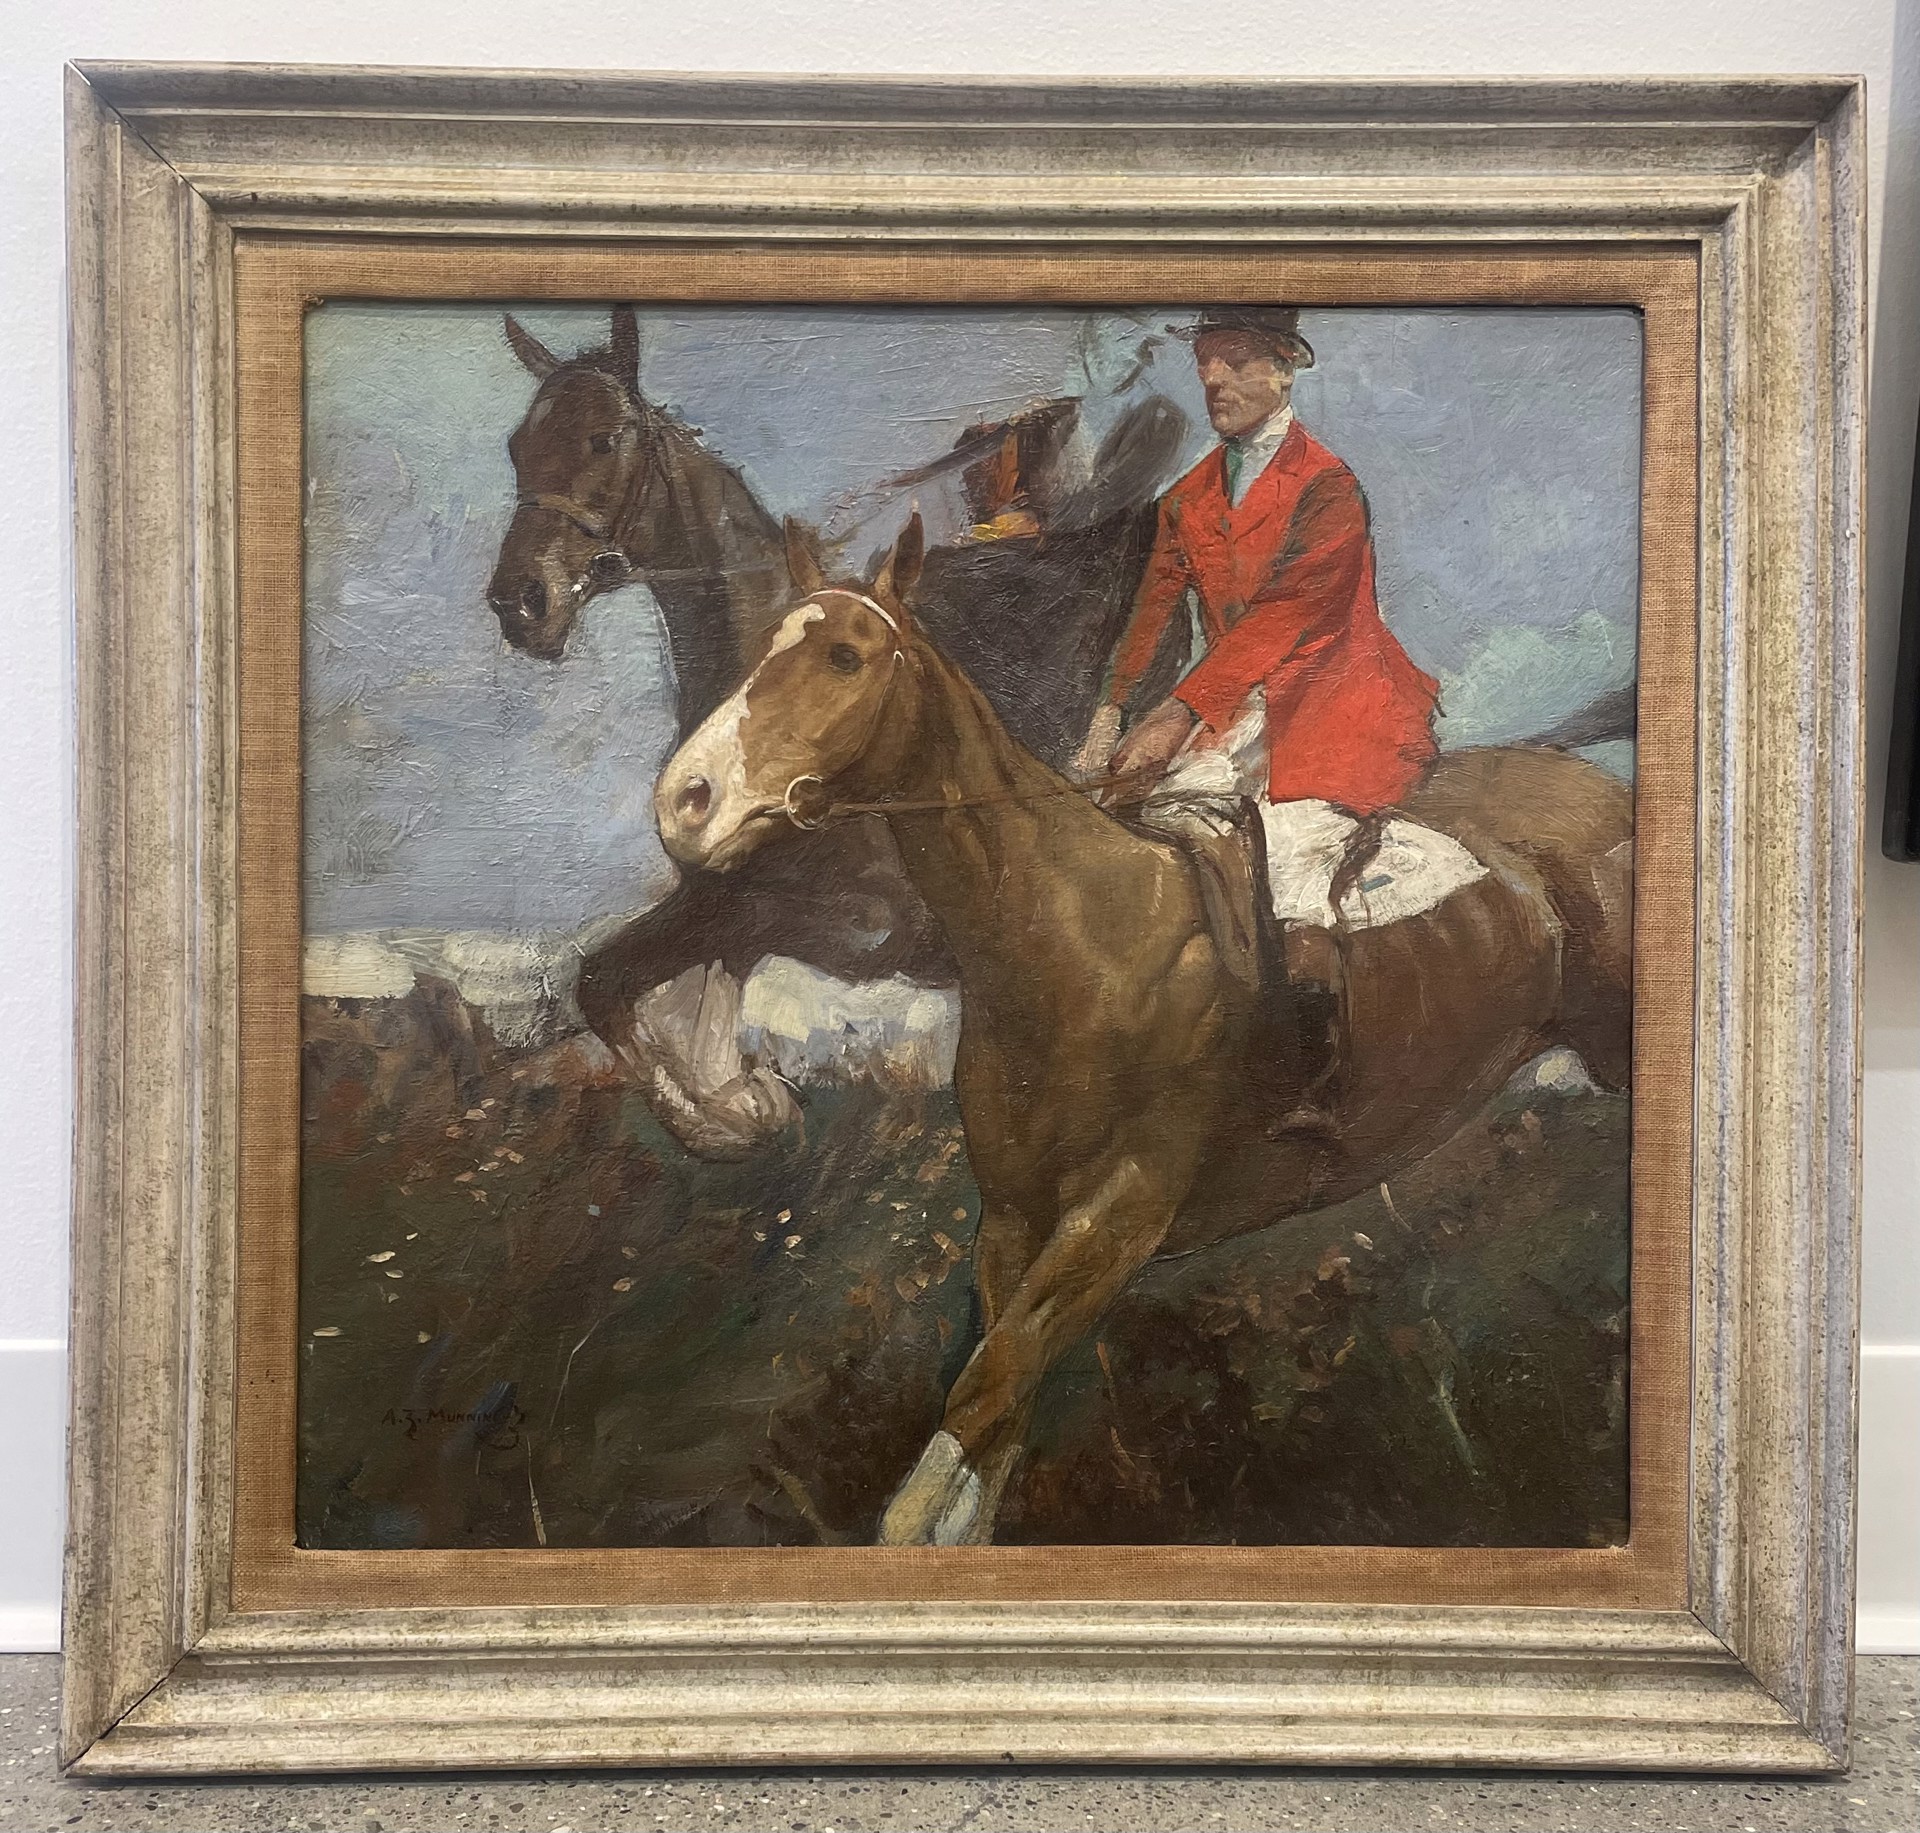 Over the Hedge by Sir Alfred J. Munnings